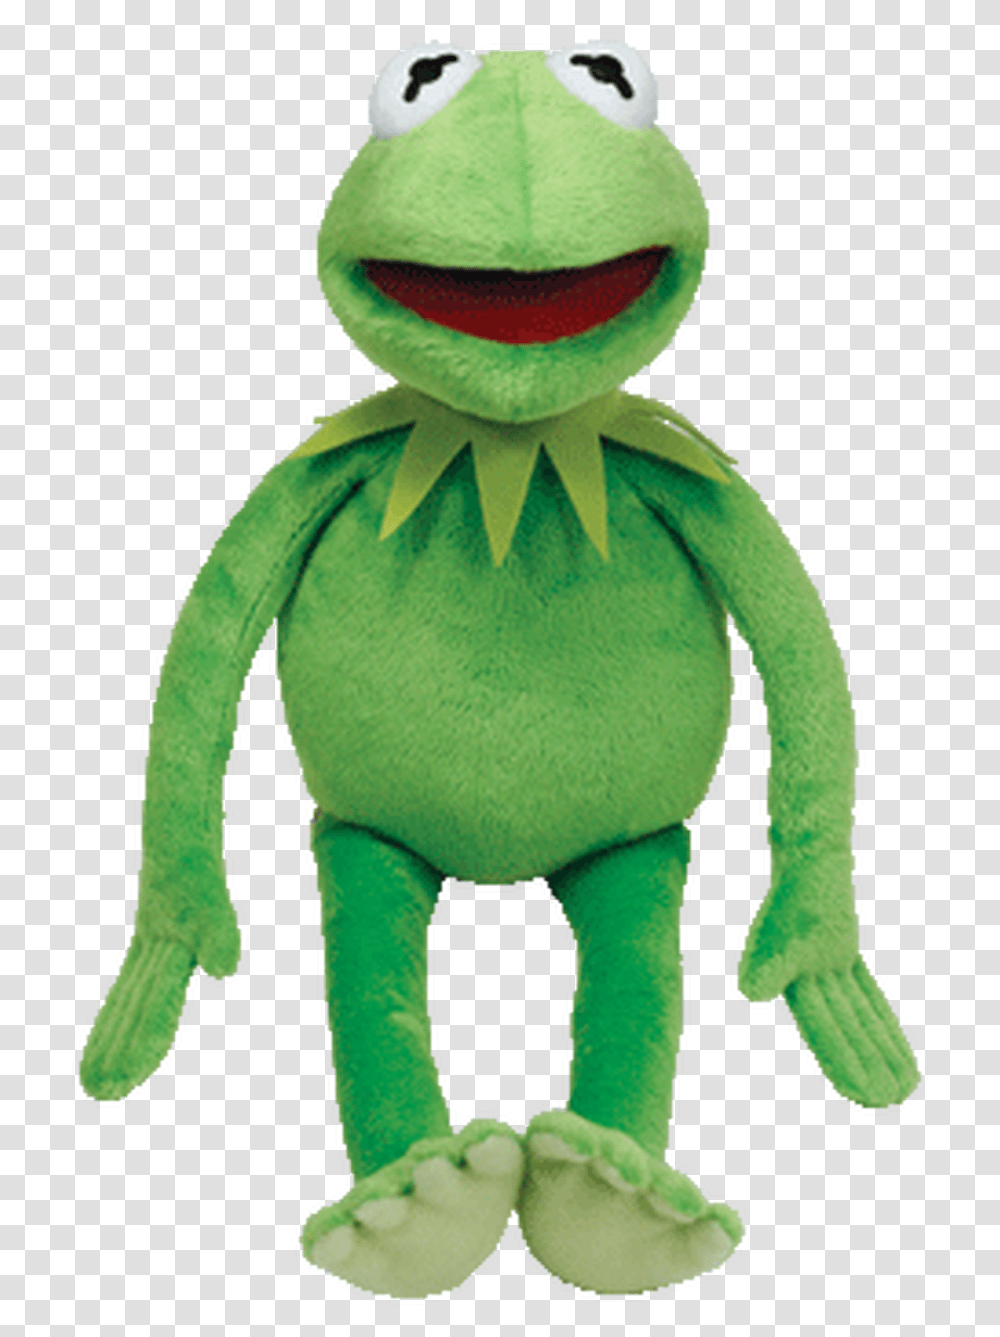 Ty Bean Buddies Muppets Kermit The Frog 13 Inch Plush Kermit The Frog Soft Toy, Green, Mascot Transparent Png